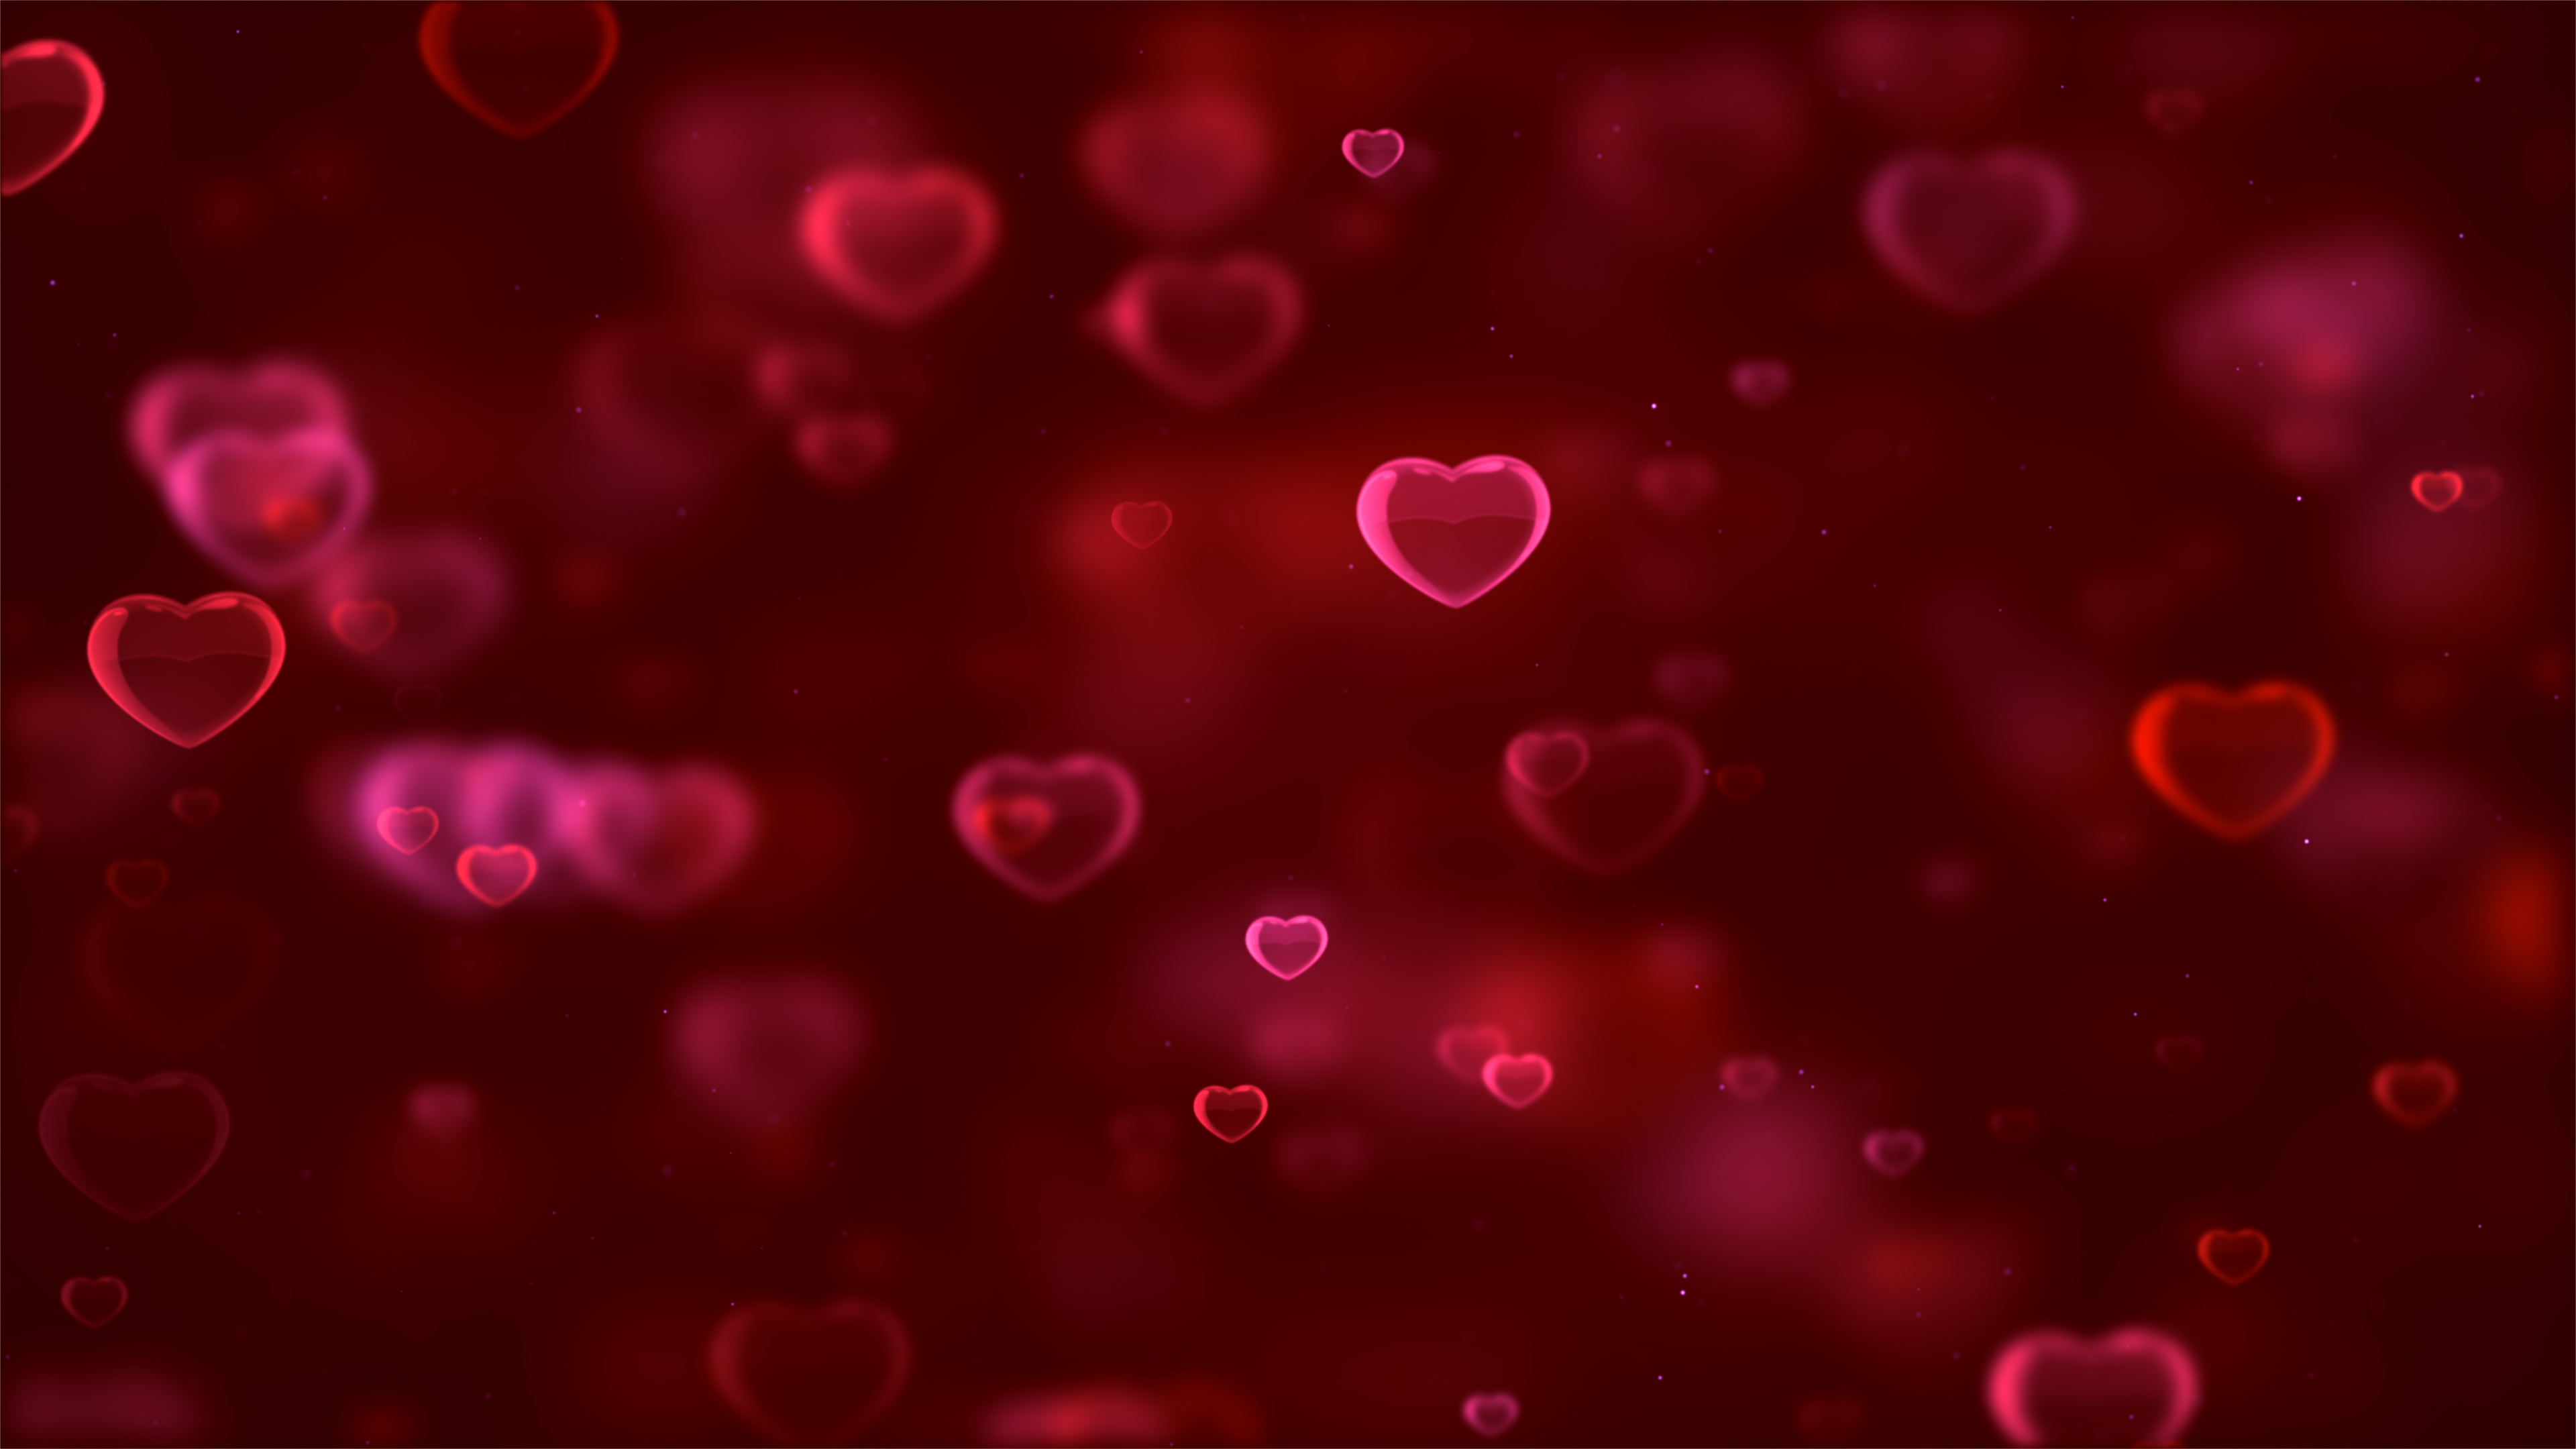 Love Hearts Red Background 4K